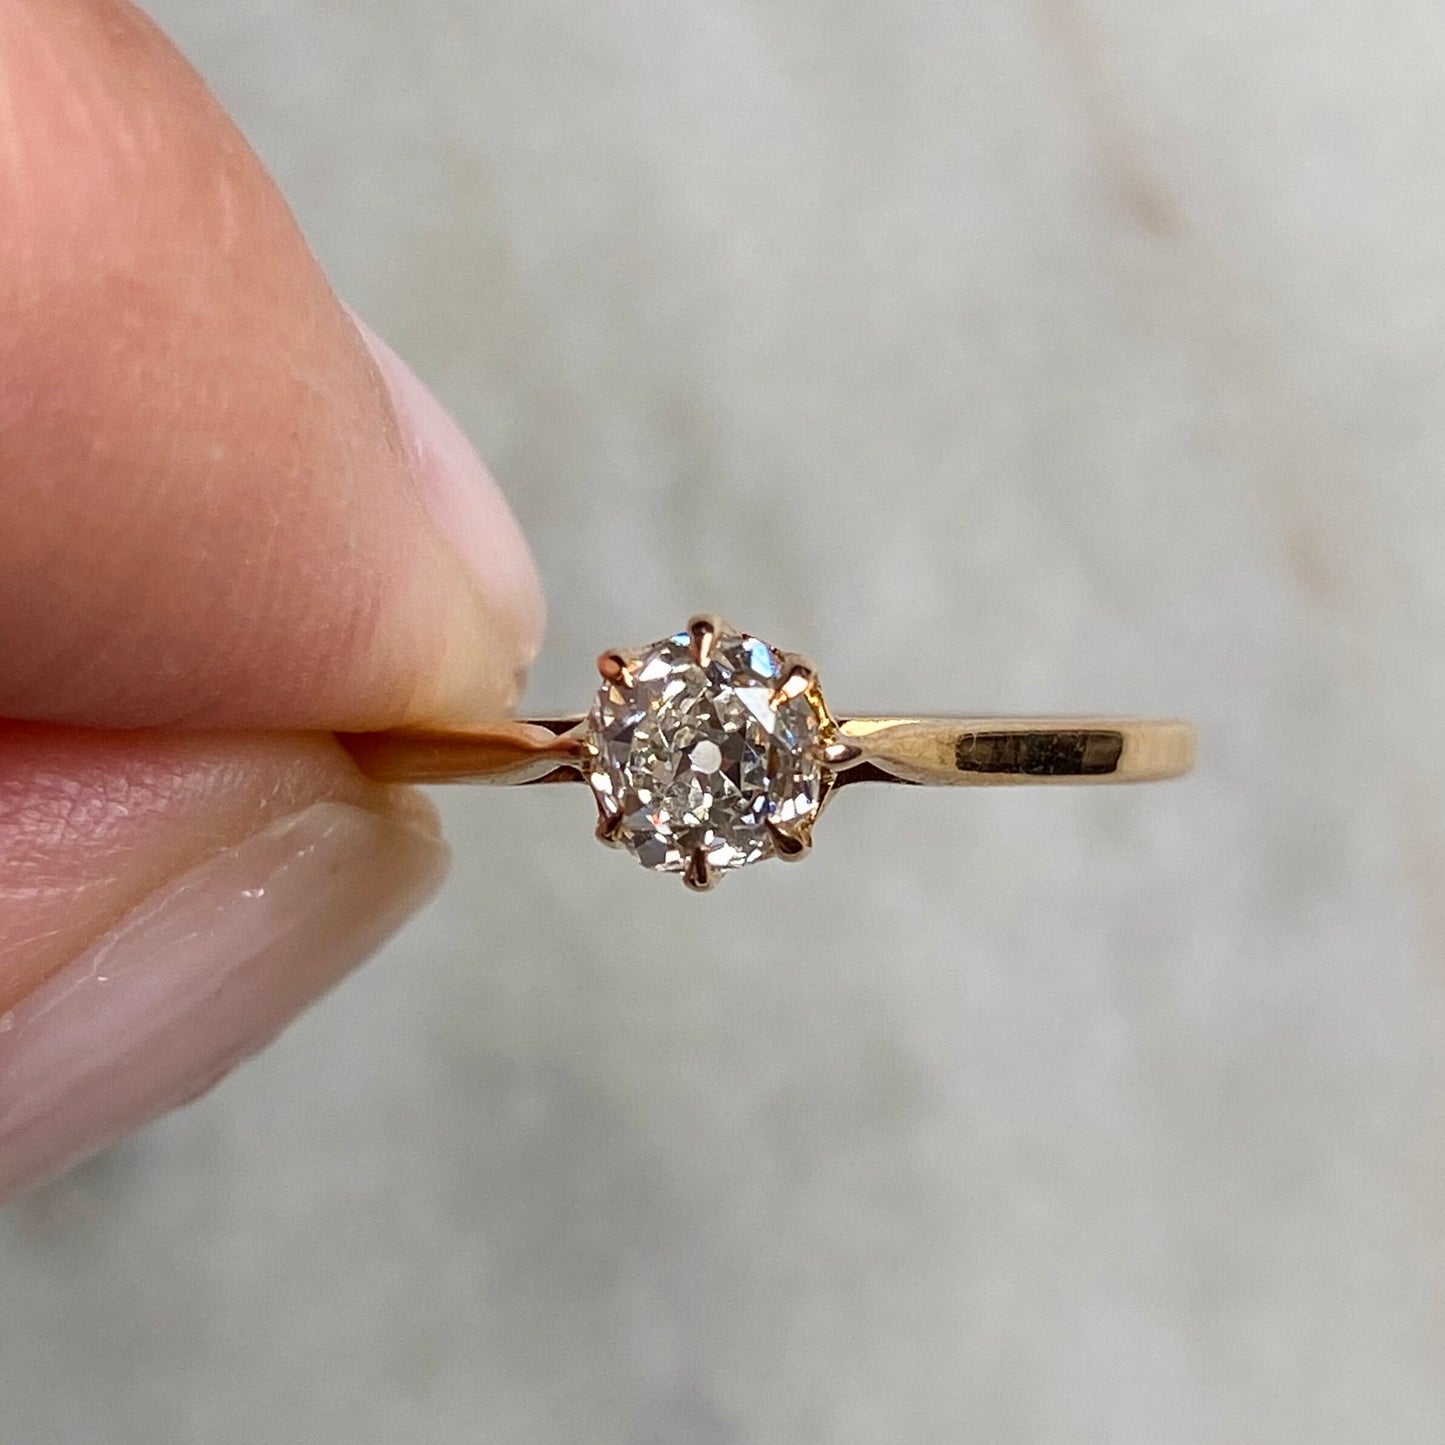 VINTAGE 0.45 CTW DIAMOND SOLITAIRE w/ CLAW PRONGS